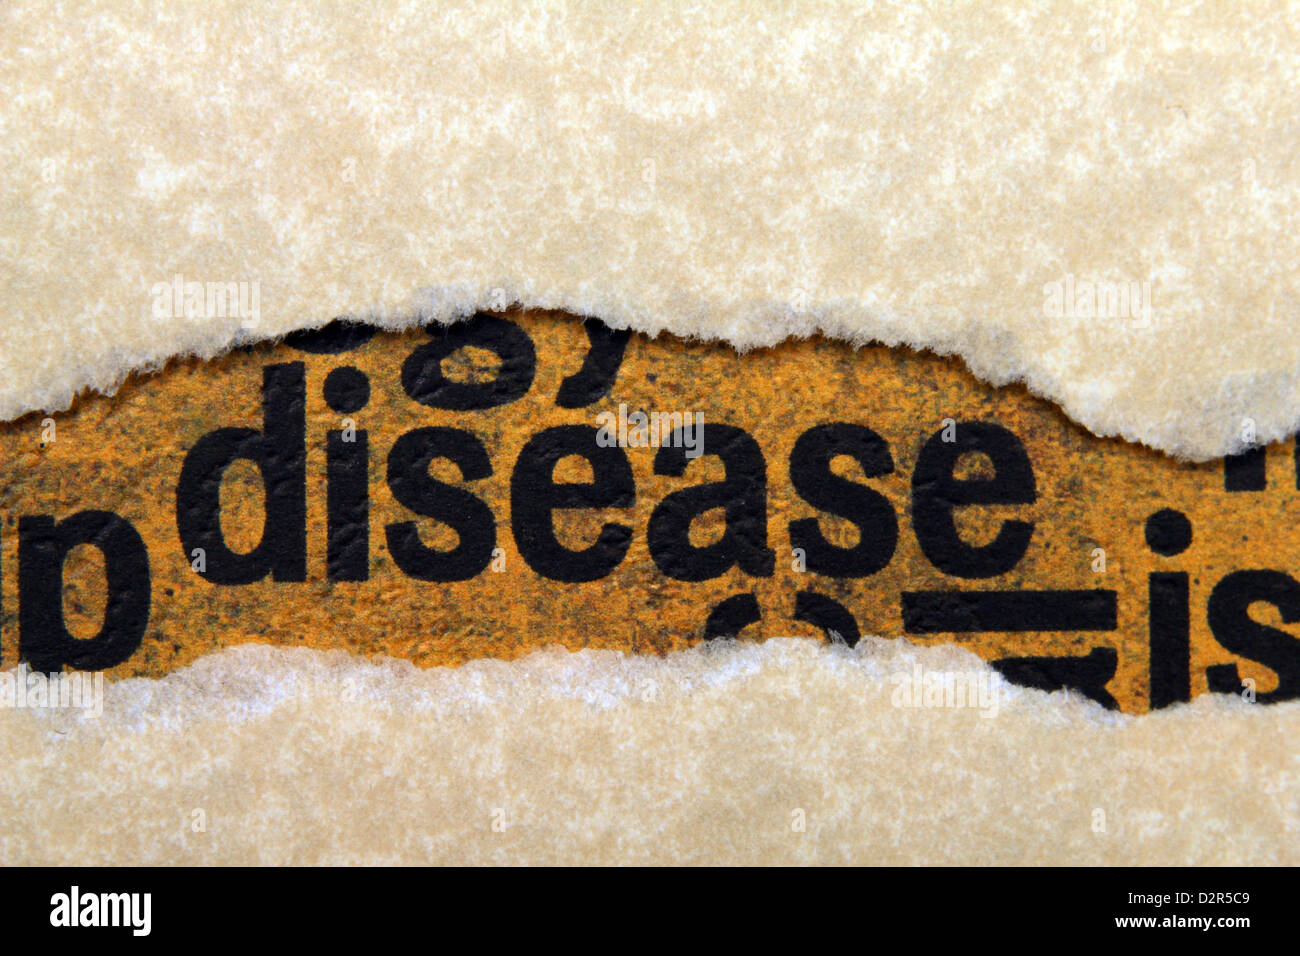 Disease text on paper hole Stock Photo